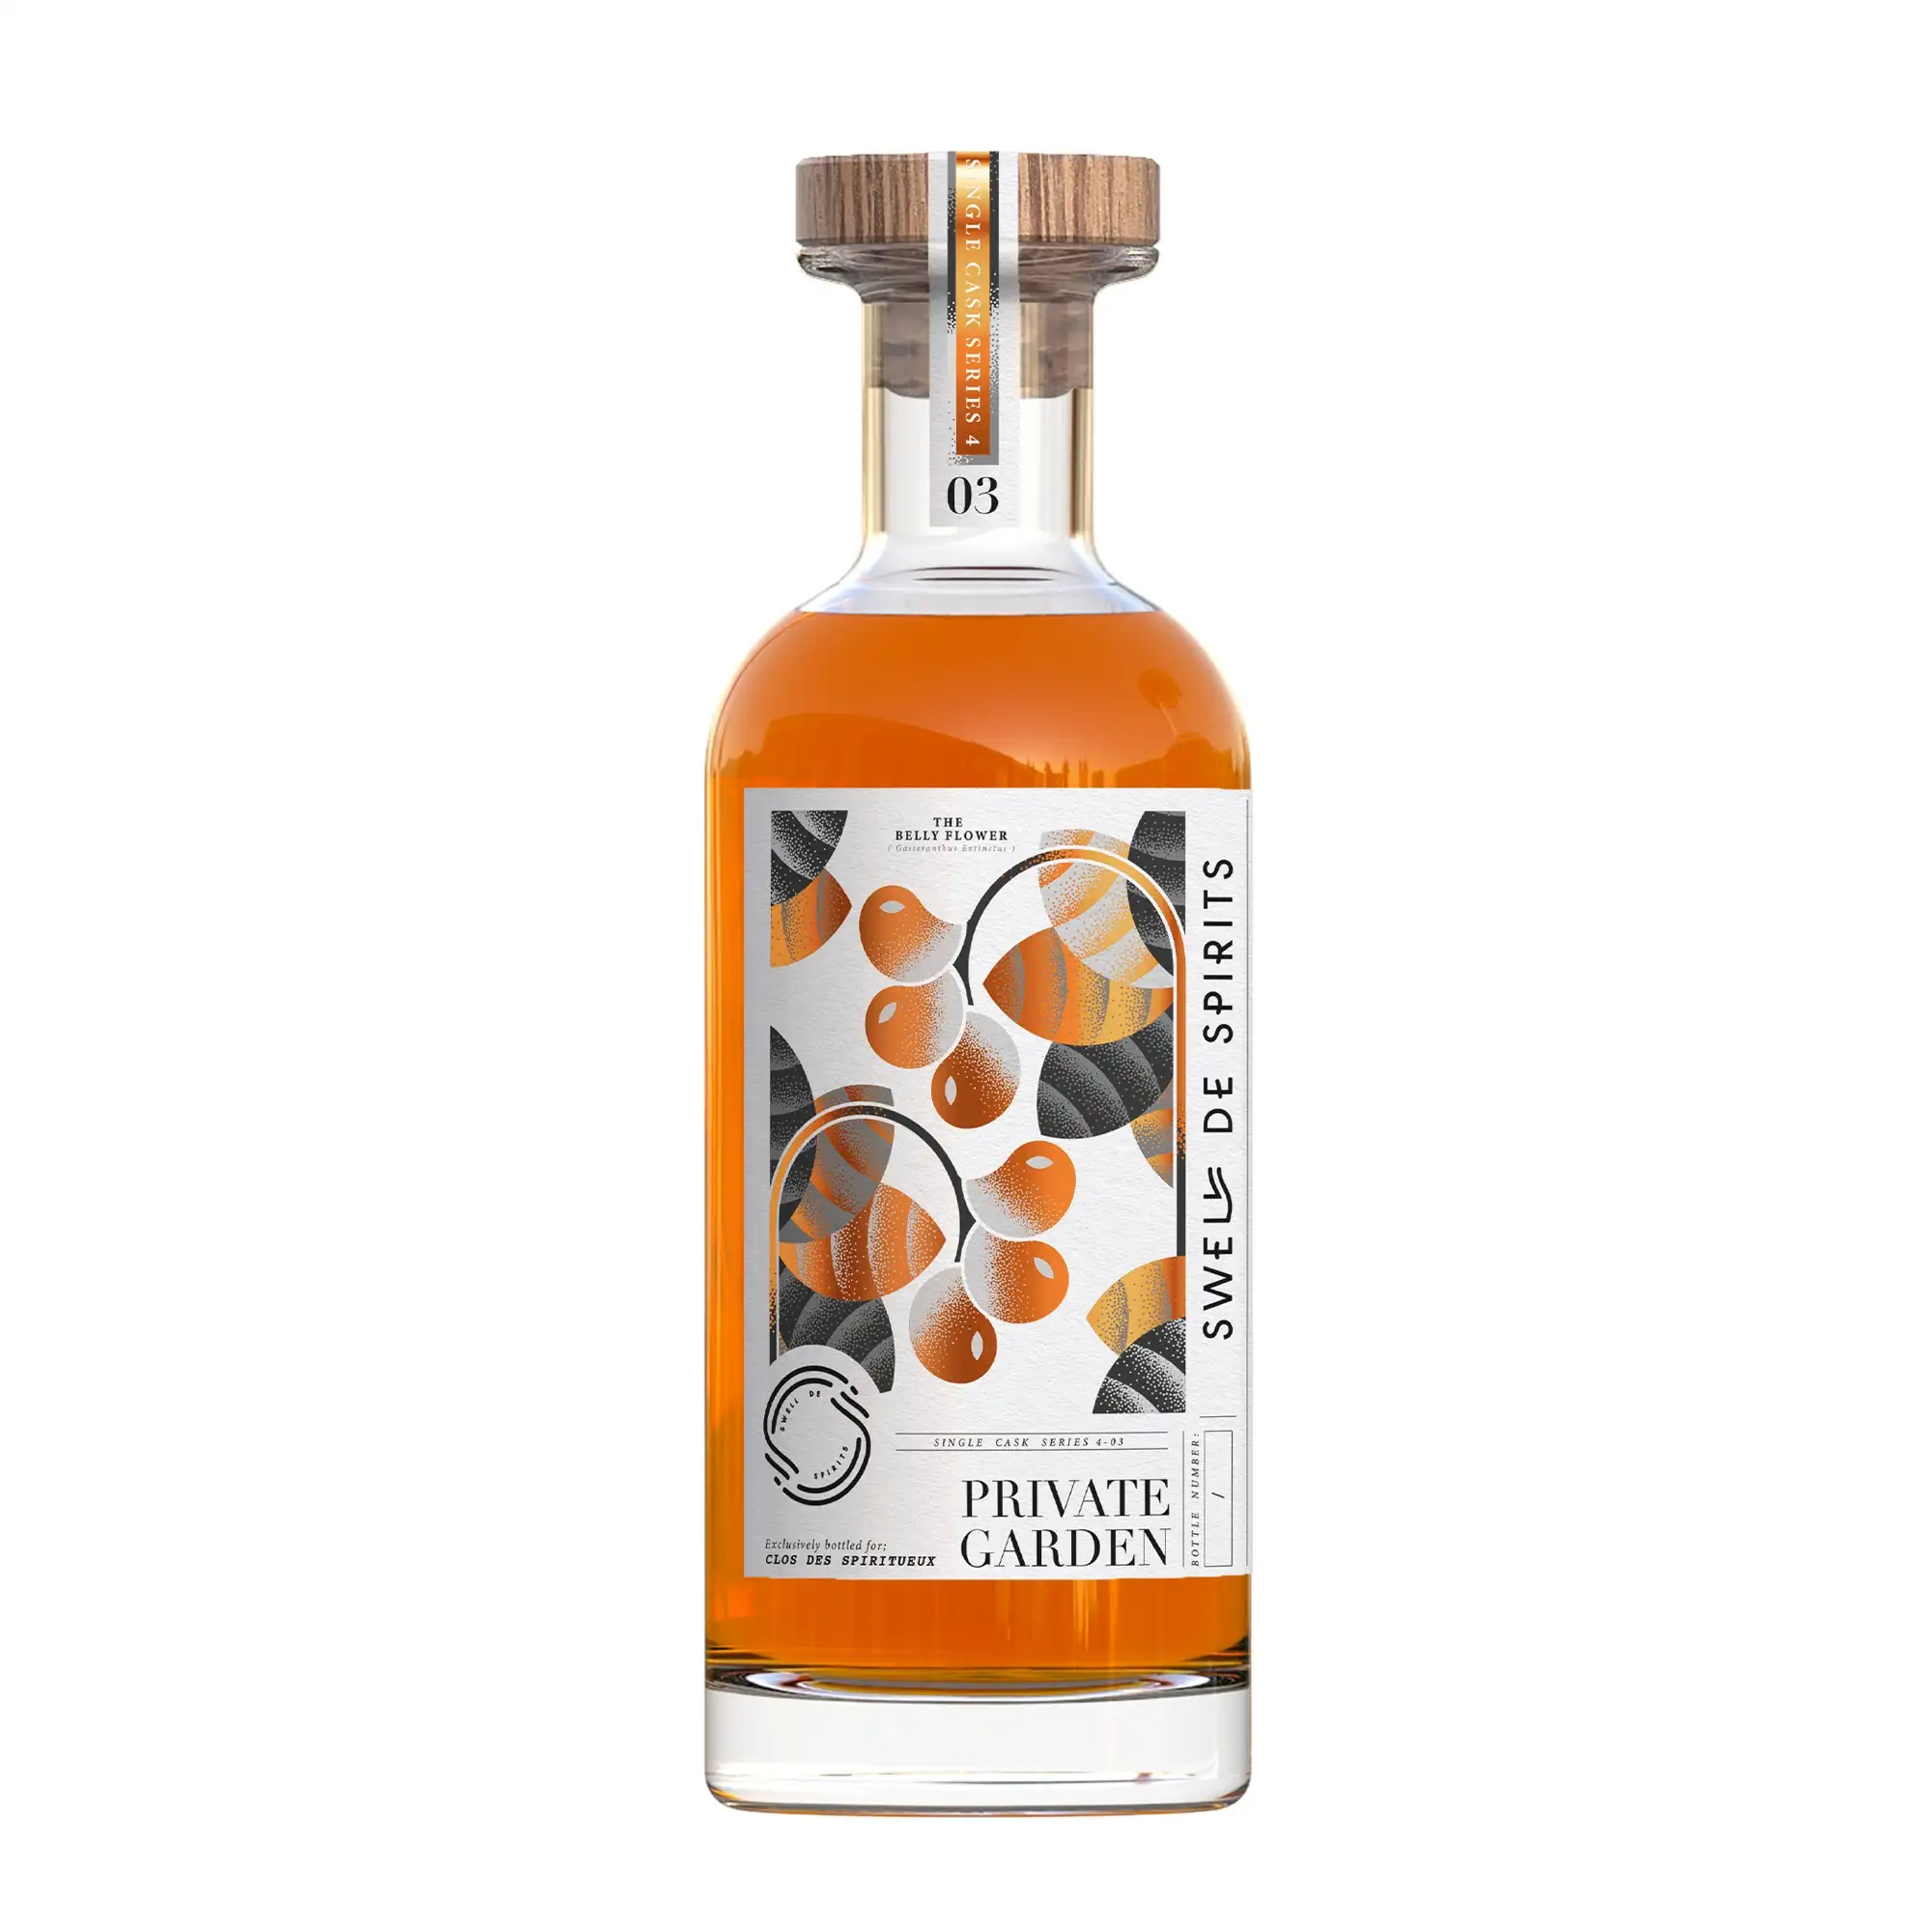 Image of the front of the bottle of the rum Private Garden N°3 (Clos des Spiritueux)